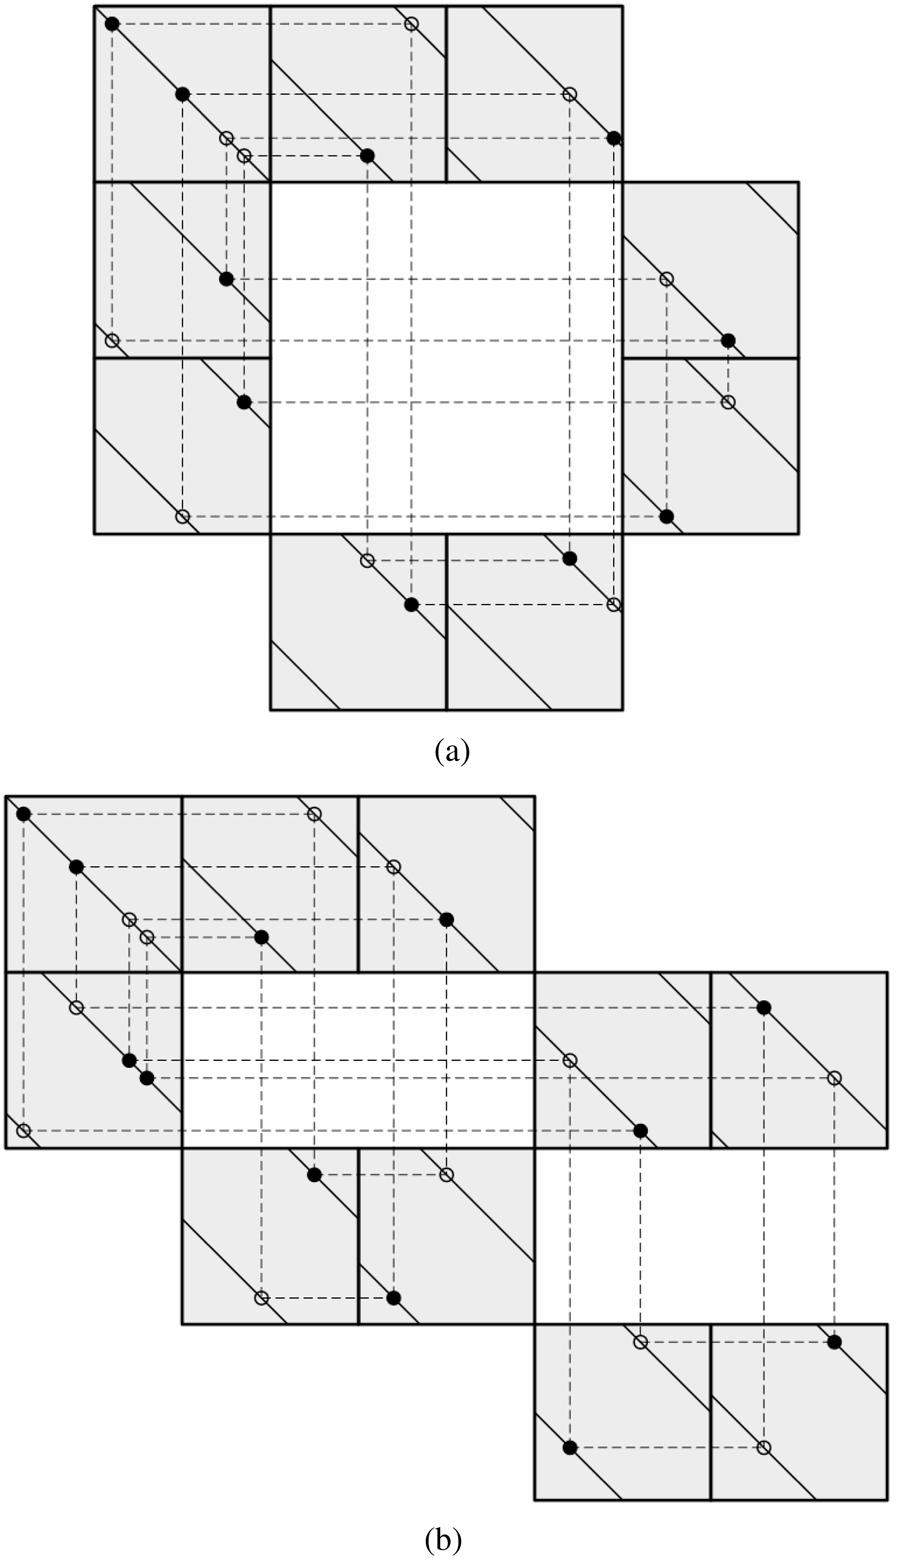 2888 IEEE TRANSACTIONS ON INFORMATION THEORY, VOL 53, NO 8, AUGUST 2007 Fig 3 (b) Case (ii) Overlapping patterns of two simple cycles when m =2 (a) Case (i) Theorem 2 tells us that in order to design